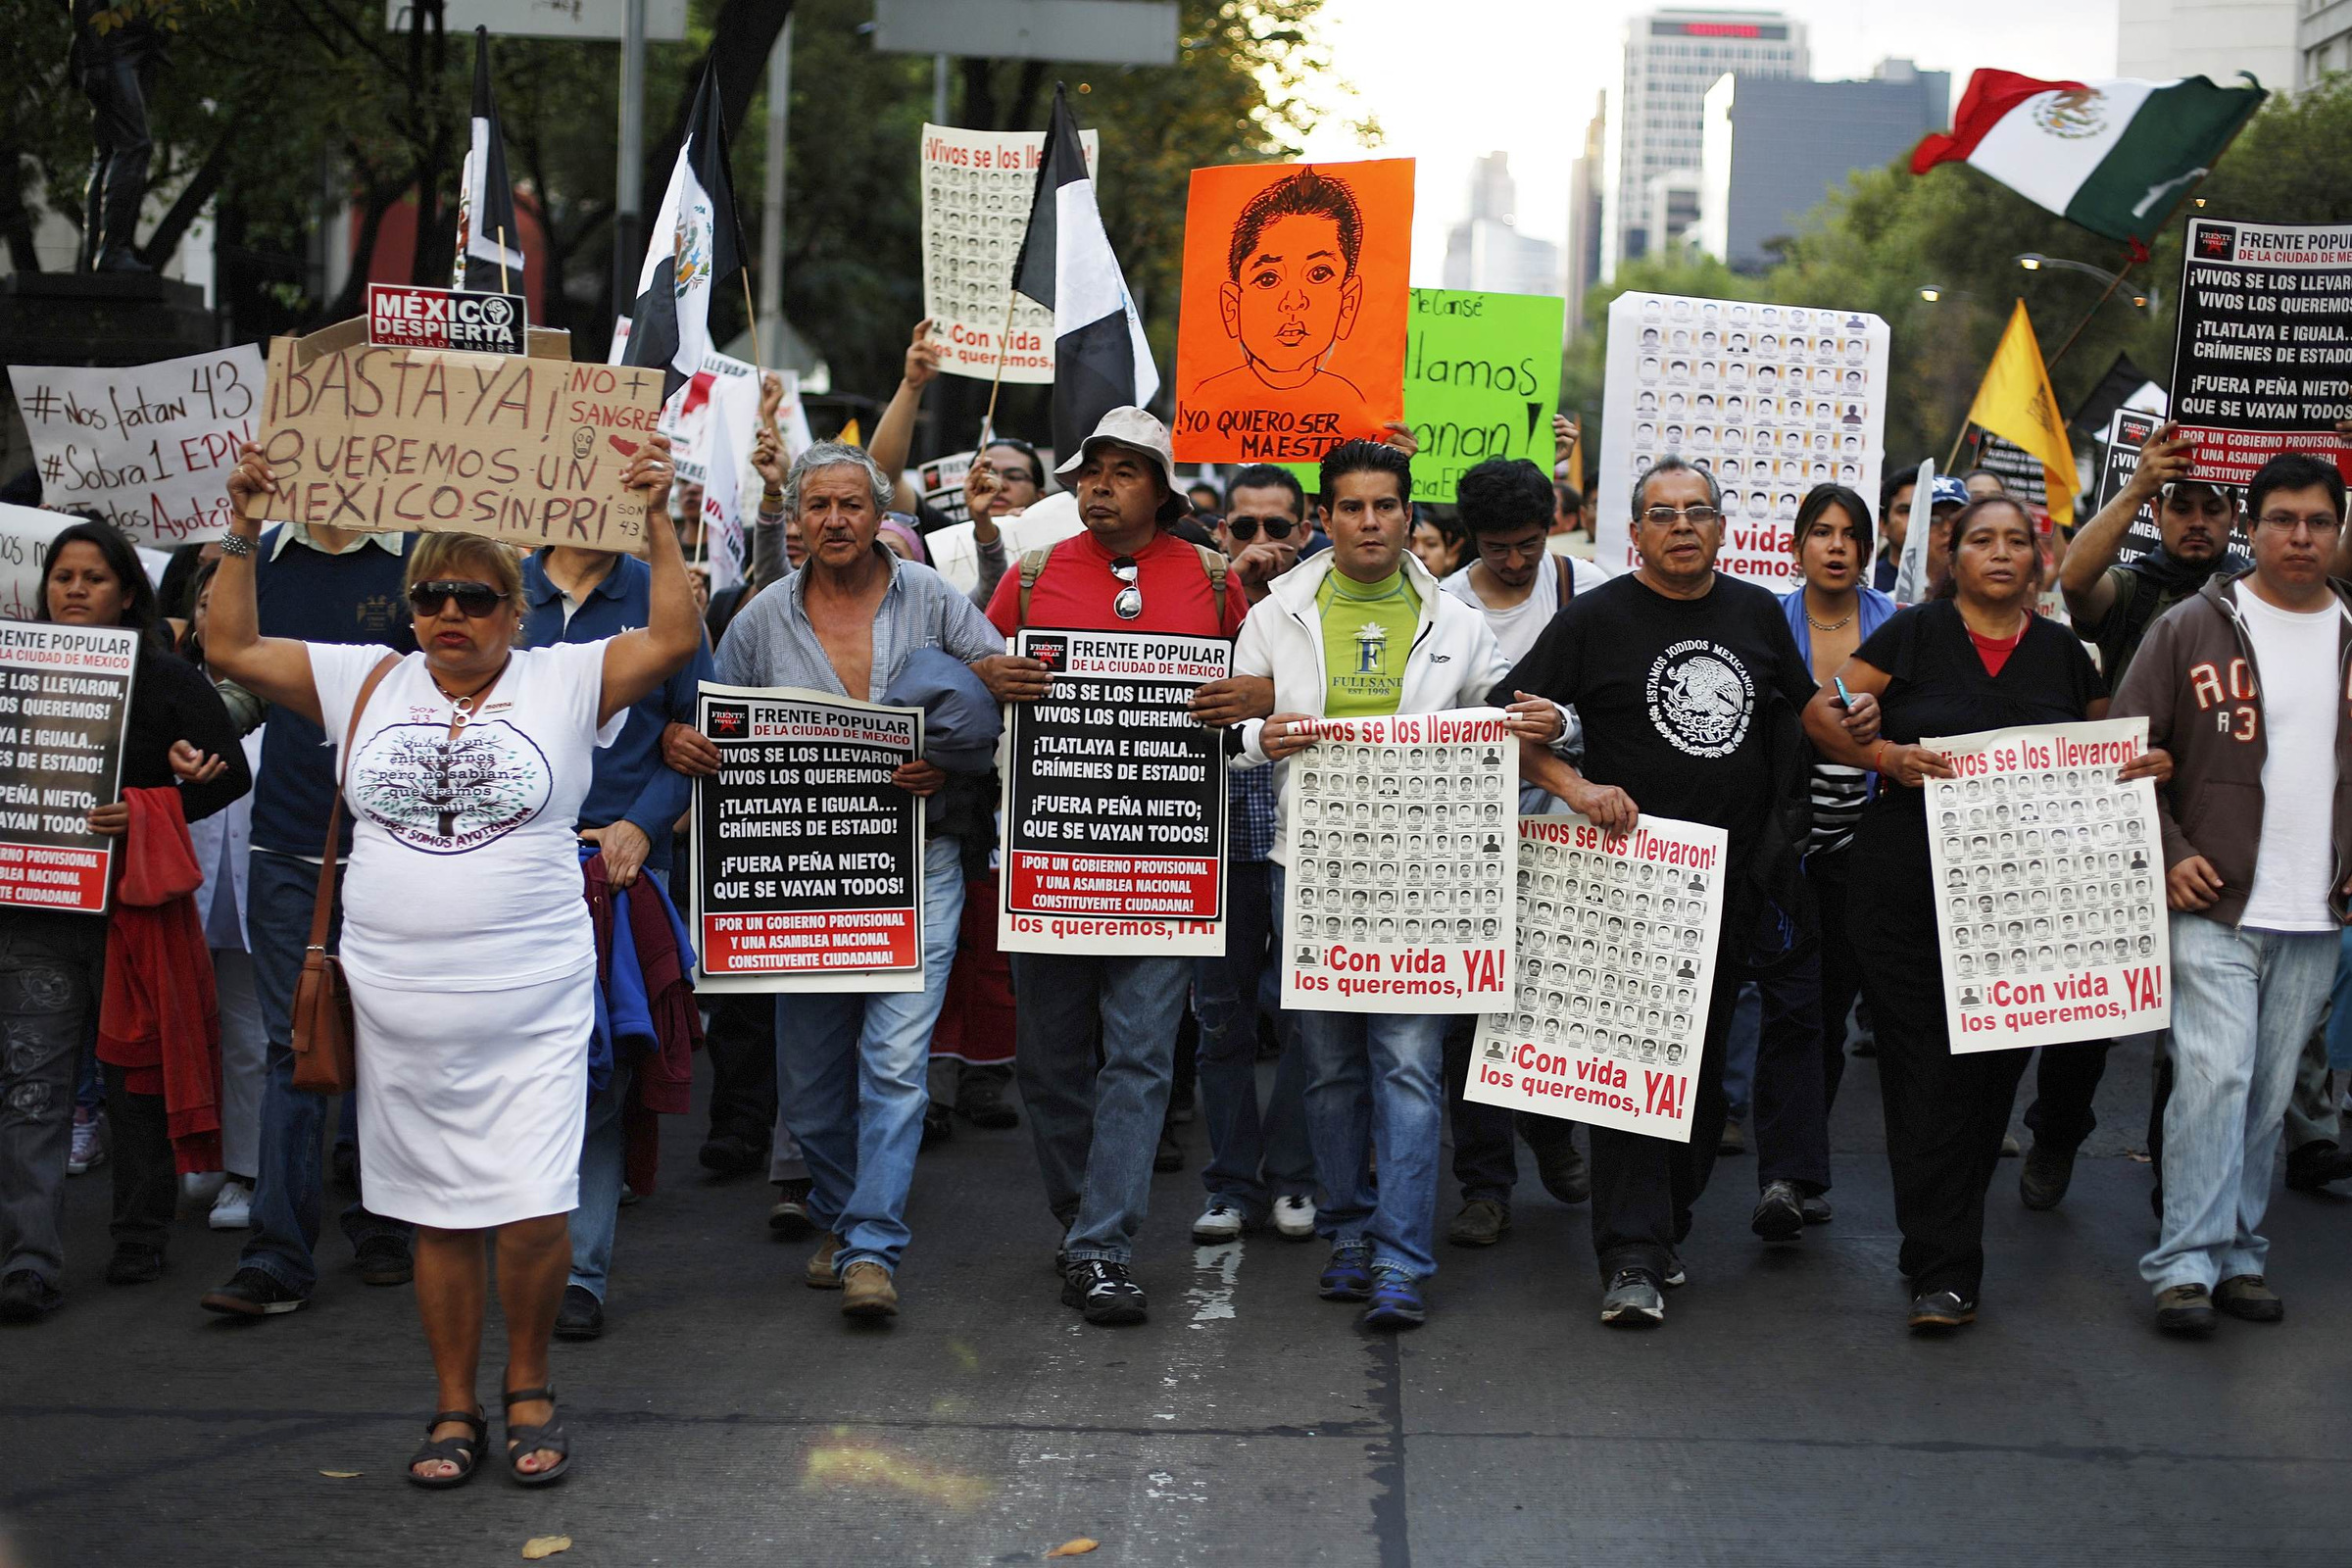 People hold posters and placards during a Nov. 16 march for the 43 missing trainee teachers in Mexico City. The remains of a Ugandan missionary priest missing for months were recovered from a mass grave in Mexico, adding to the horror of the crimes and killings in the region. (CNS/Reuters) 